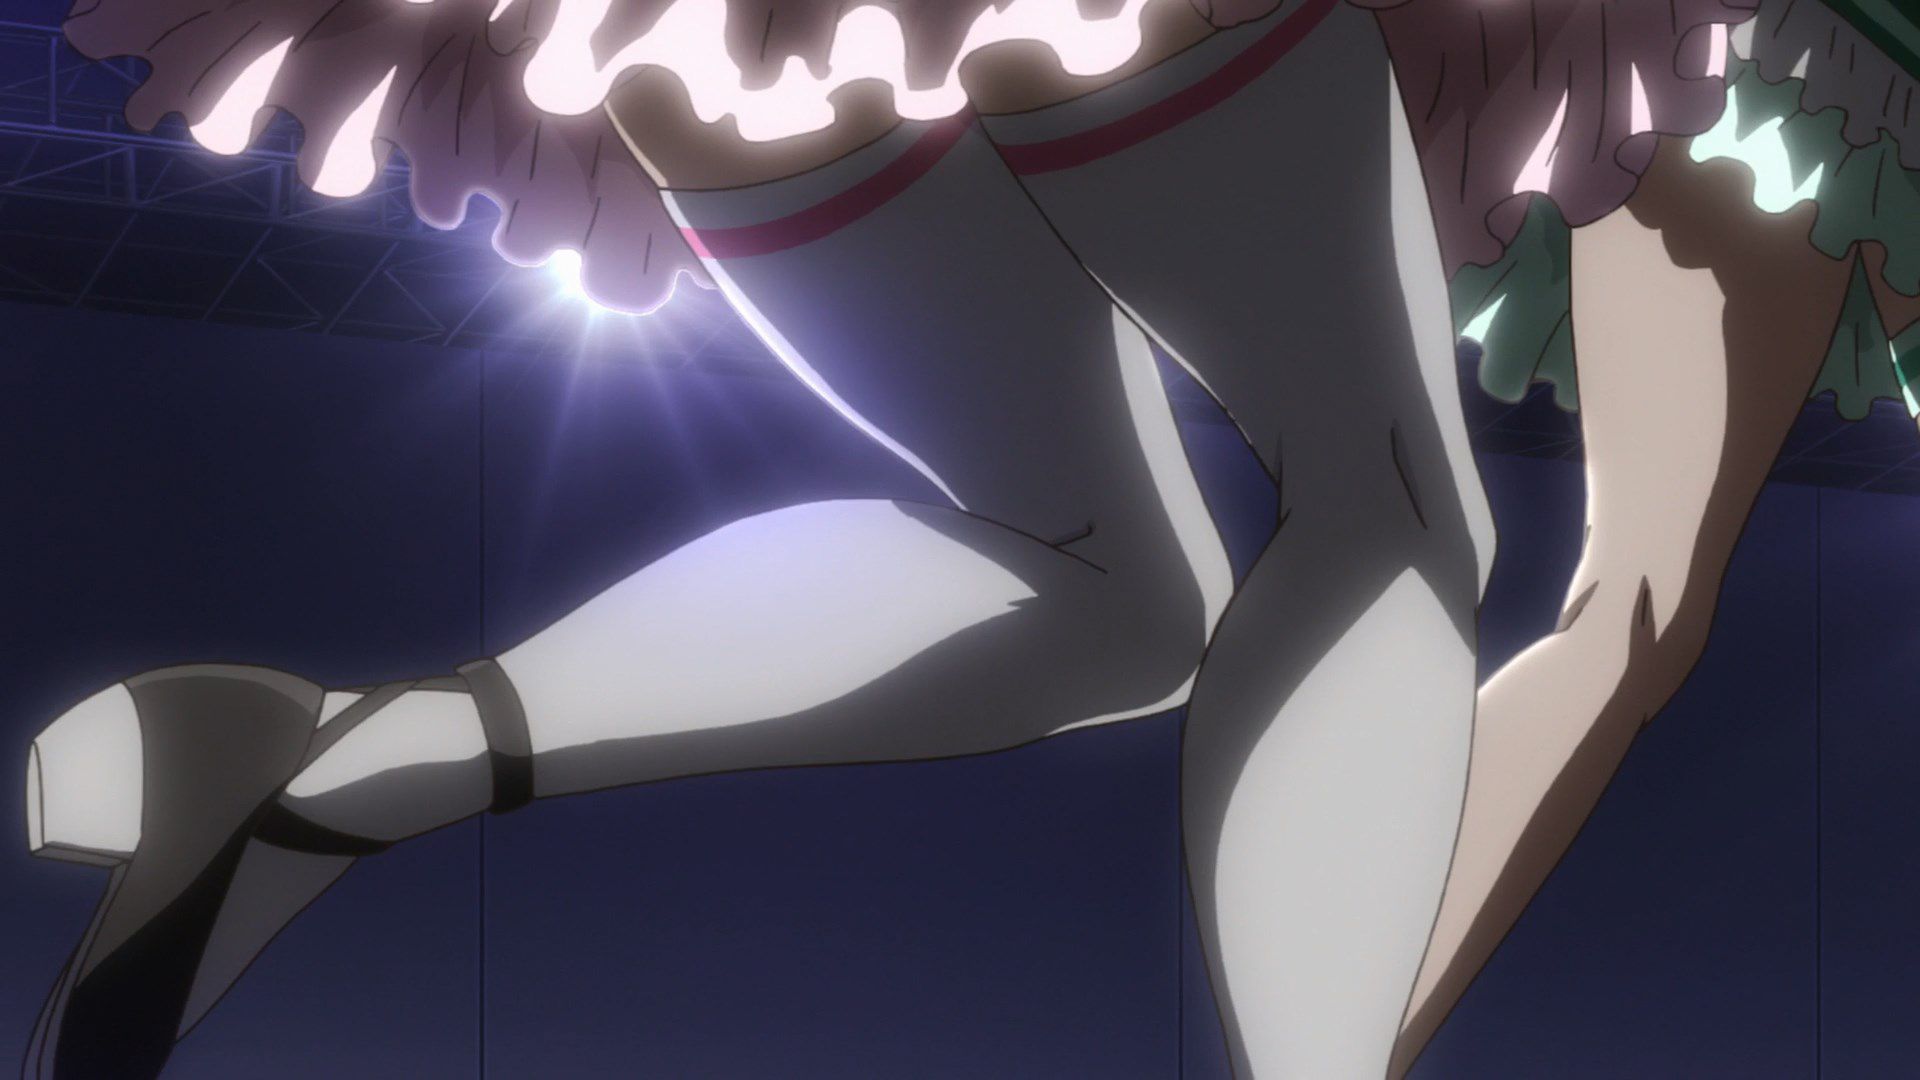 [God images] "love live! ' Μm ' PV's leg is too erotic everyone wakes up to a leg fetish of wwwww 90